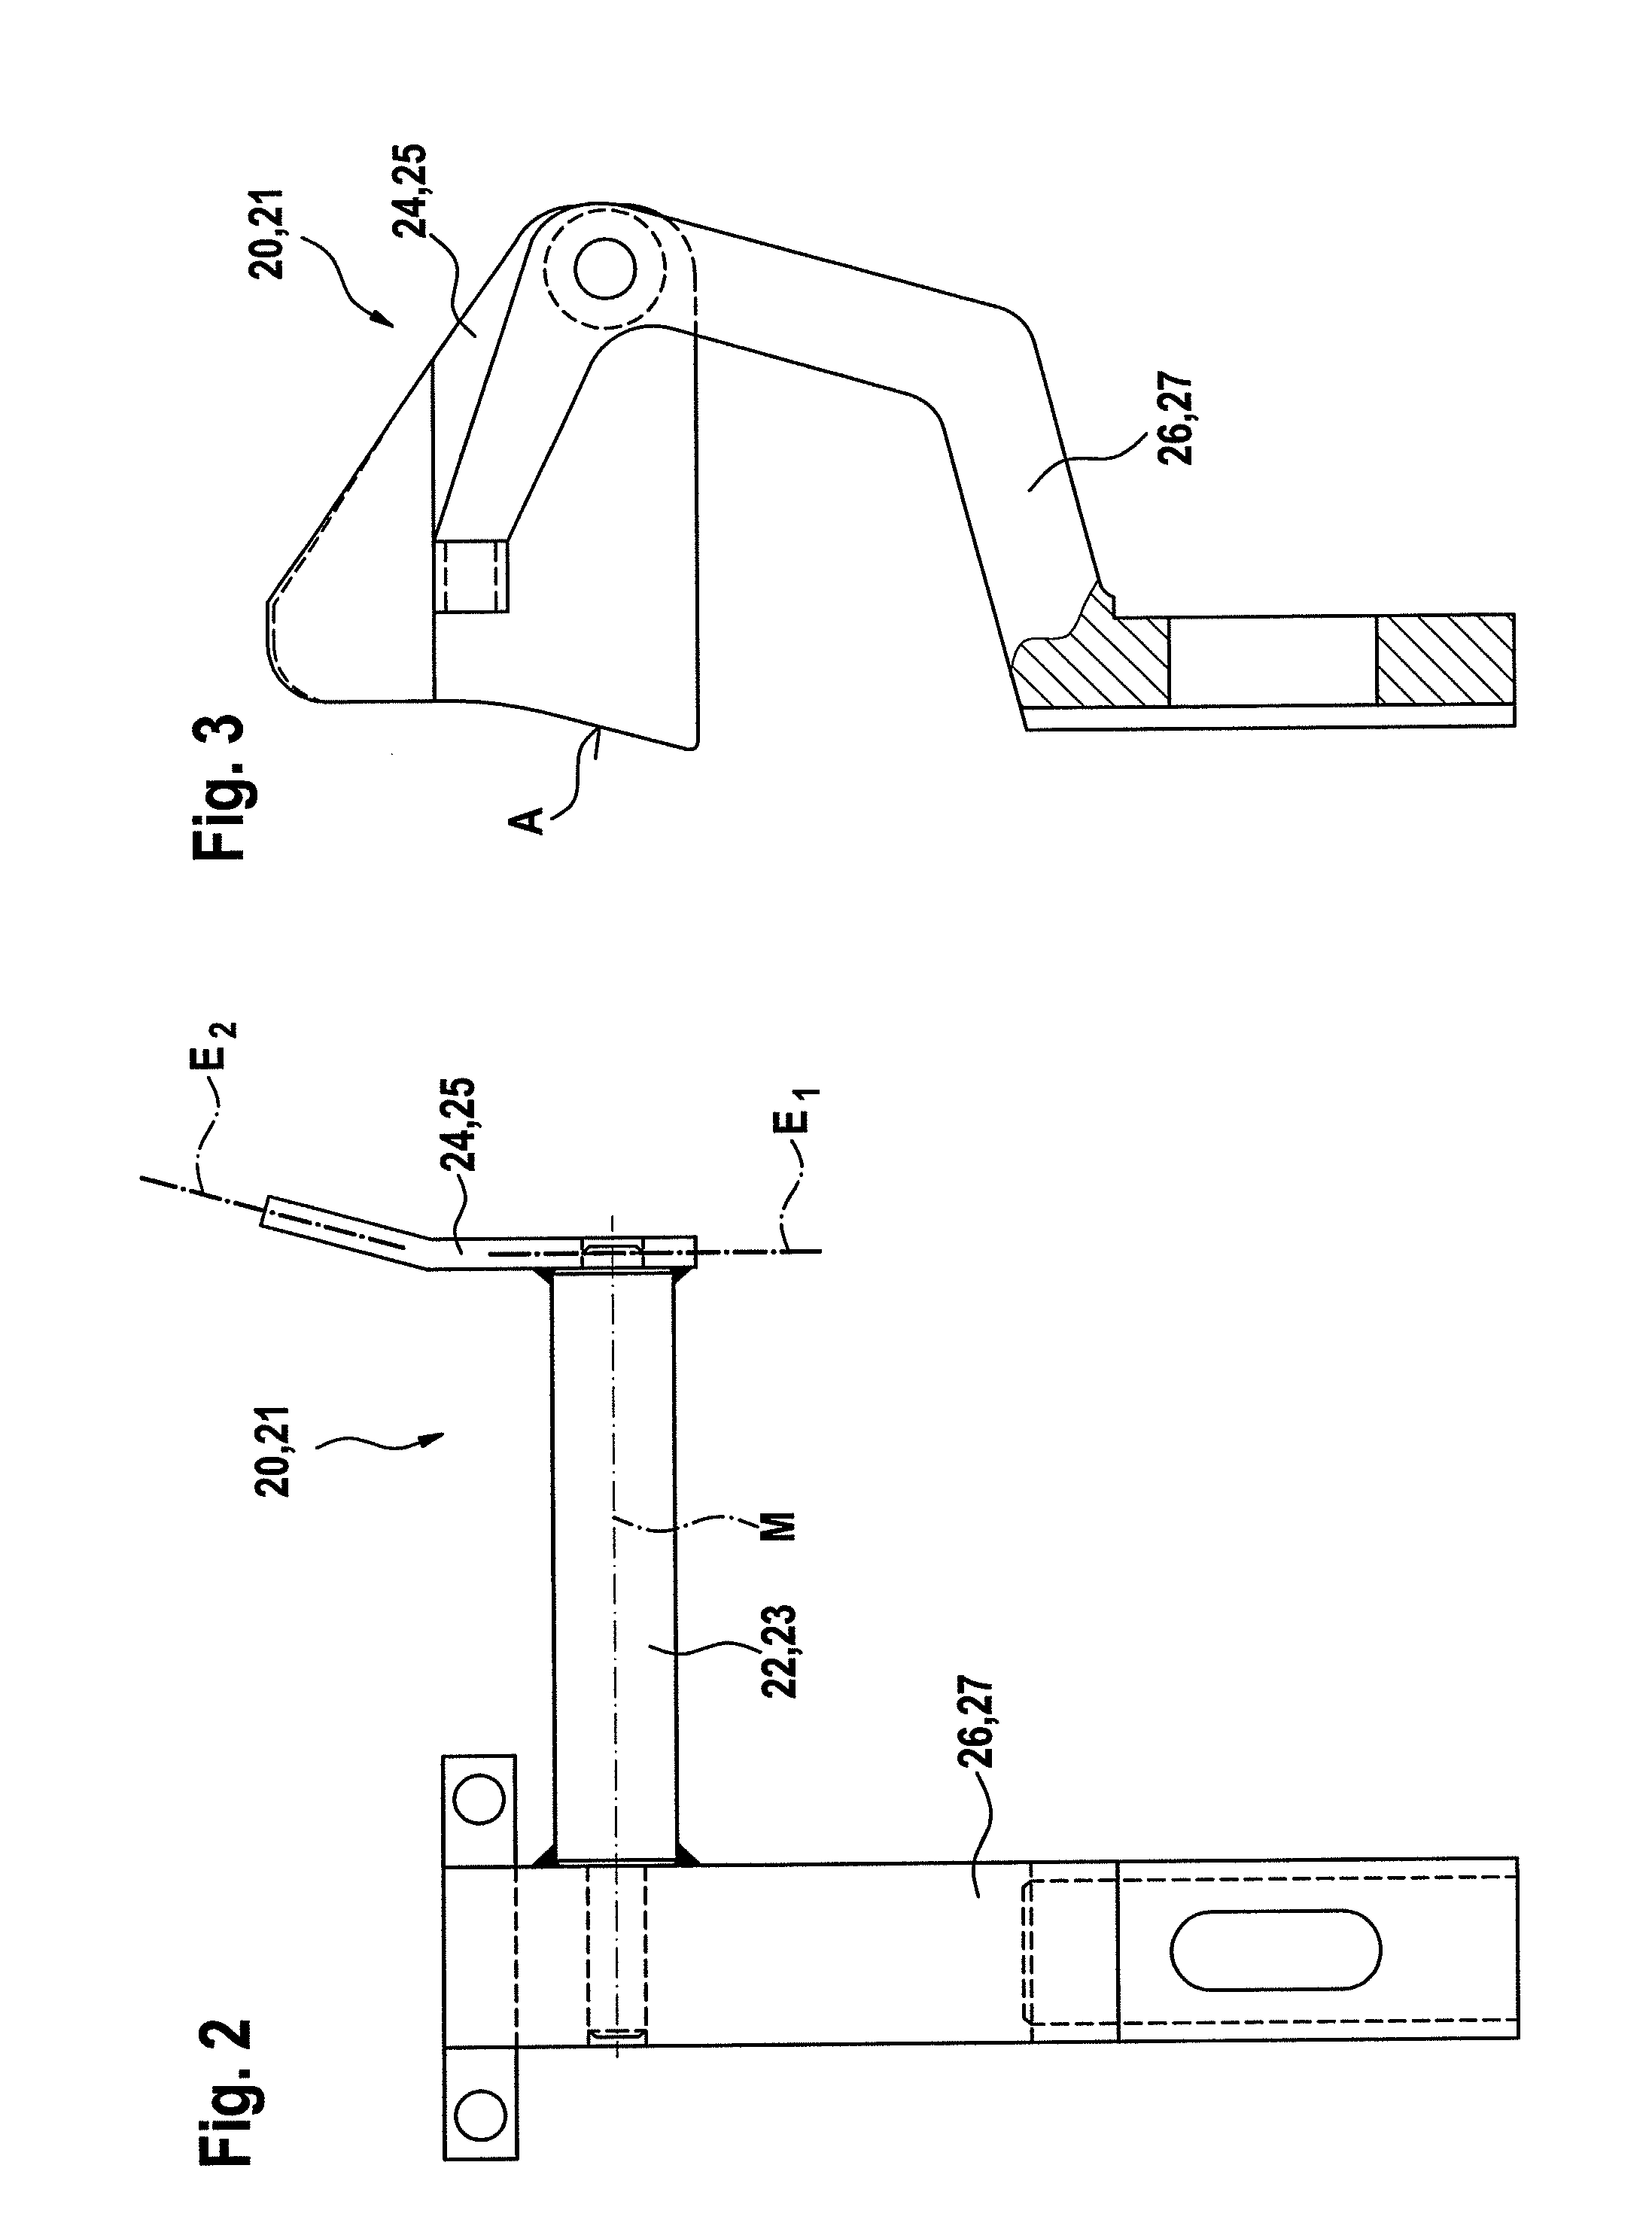 Device for receiving and fixing fish within a device for processing fish